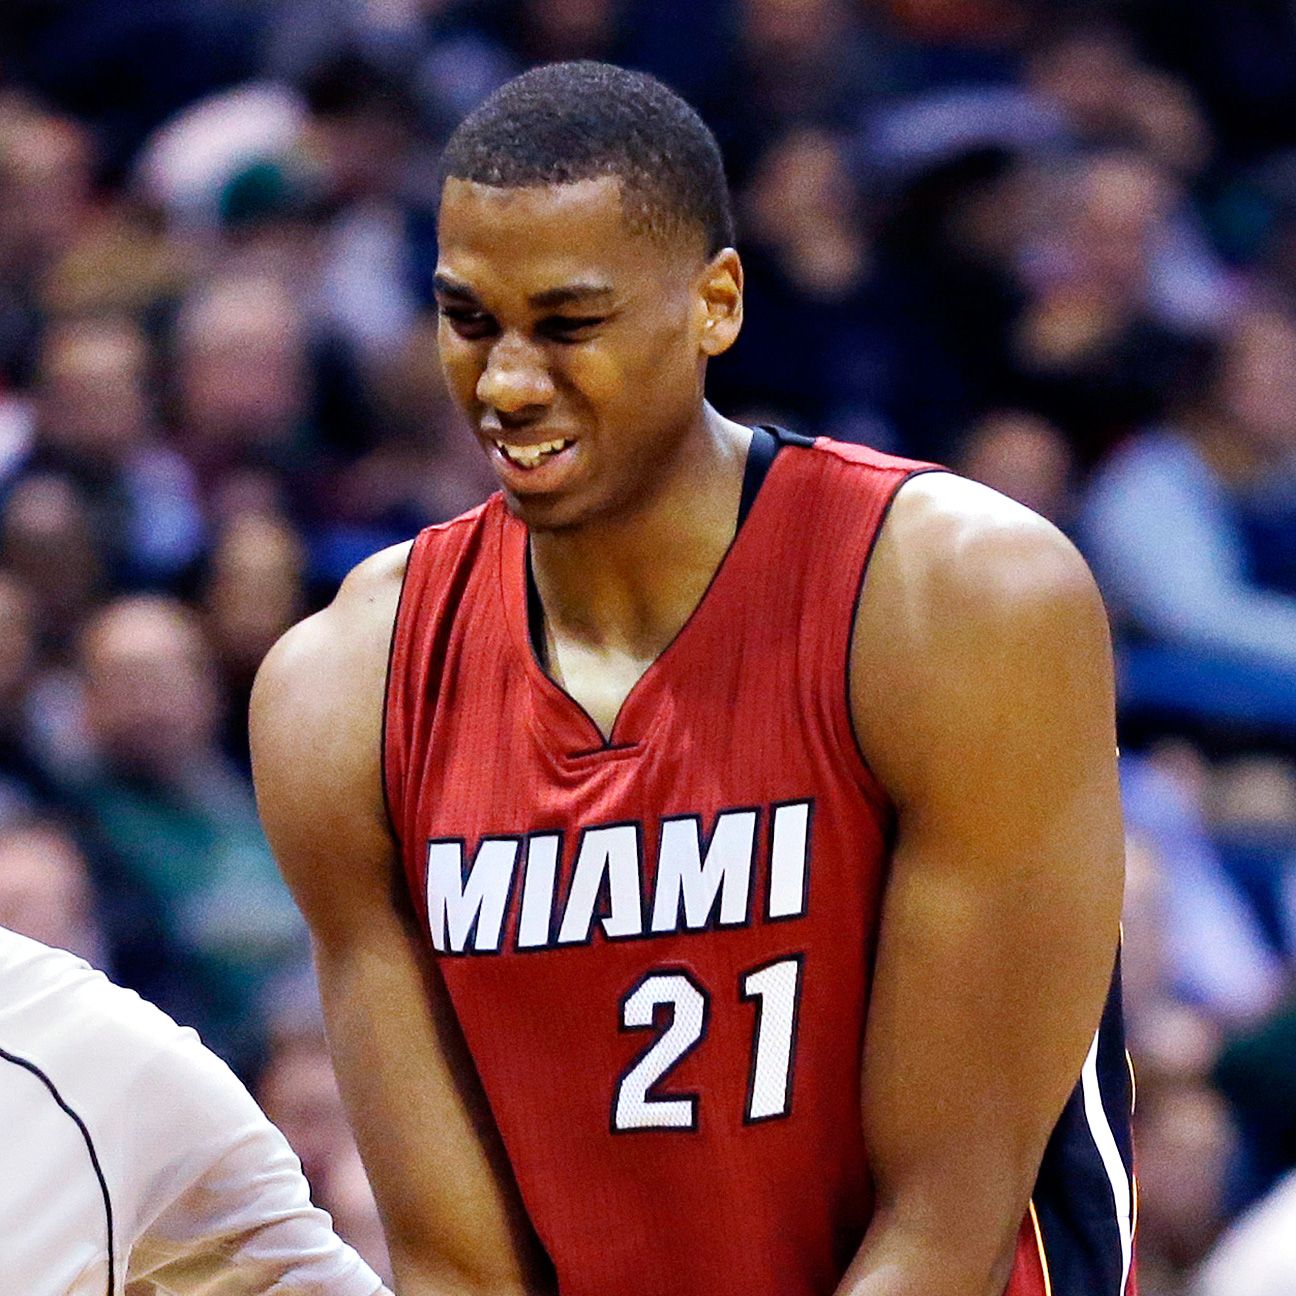 Hassan Whiteside of Miami Heat gets 10 stitches in hand